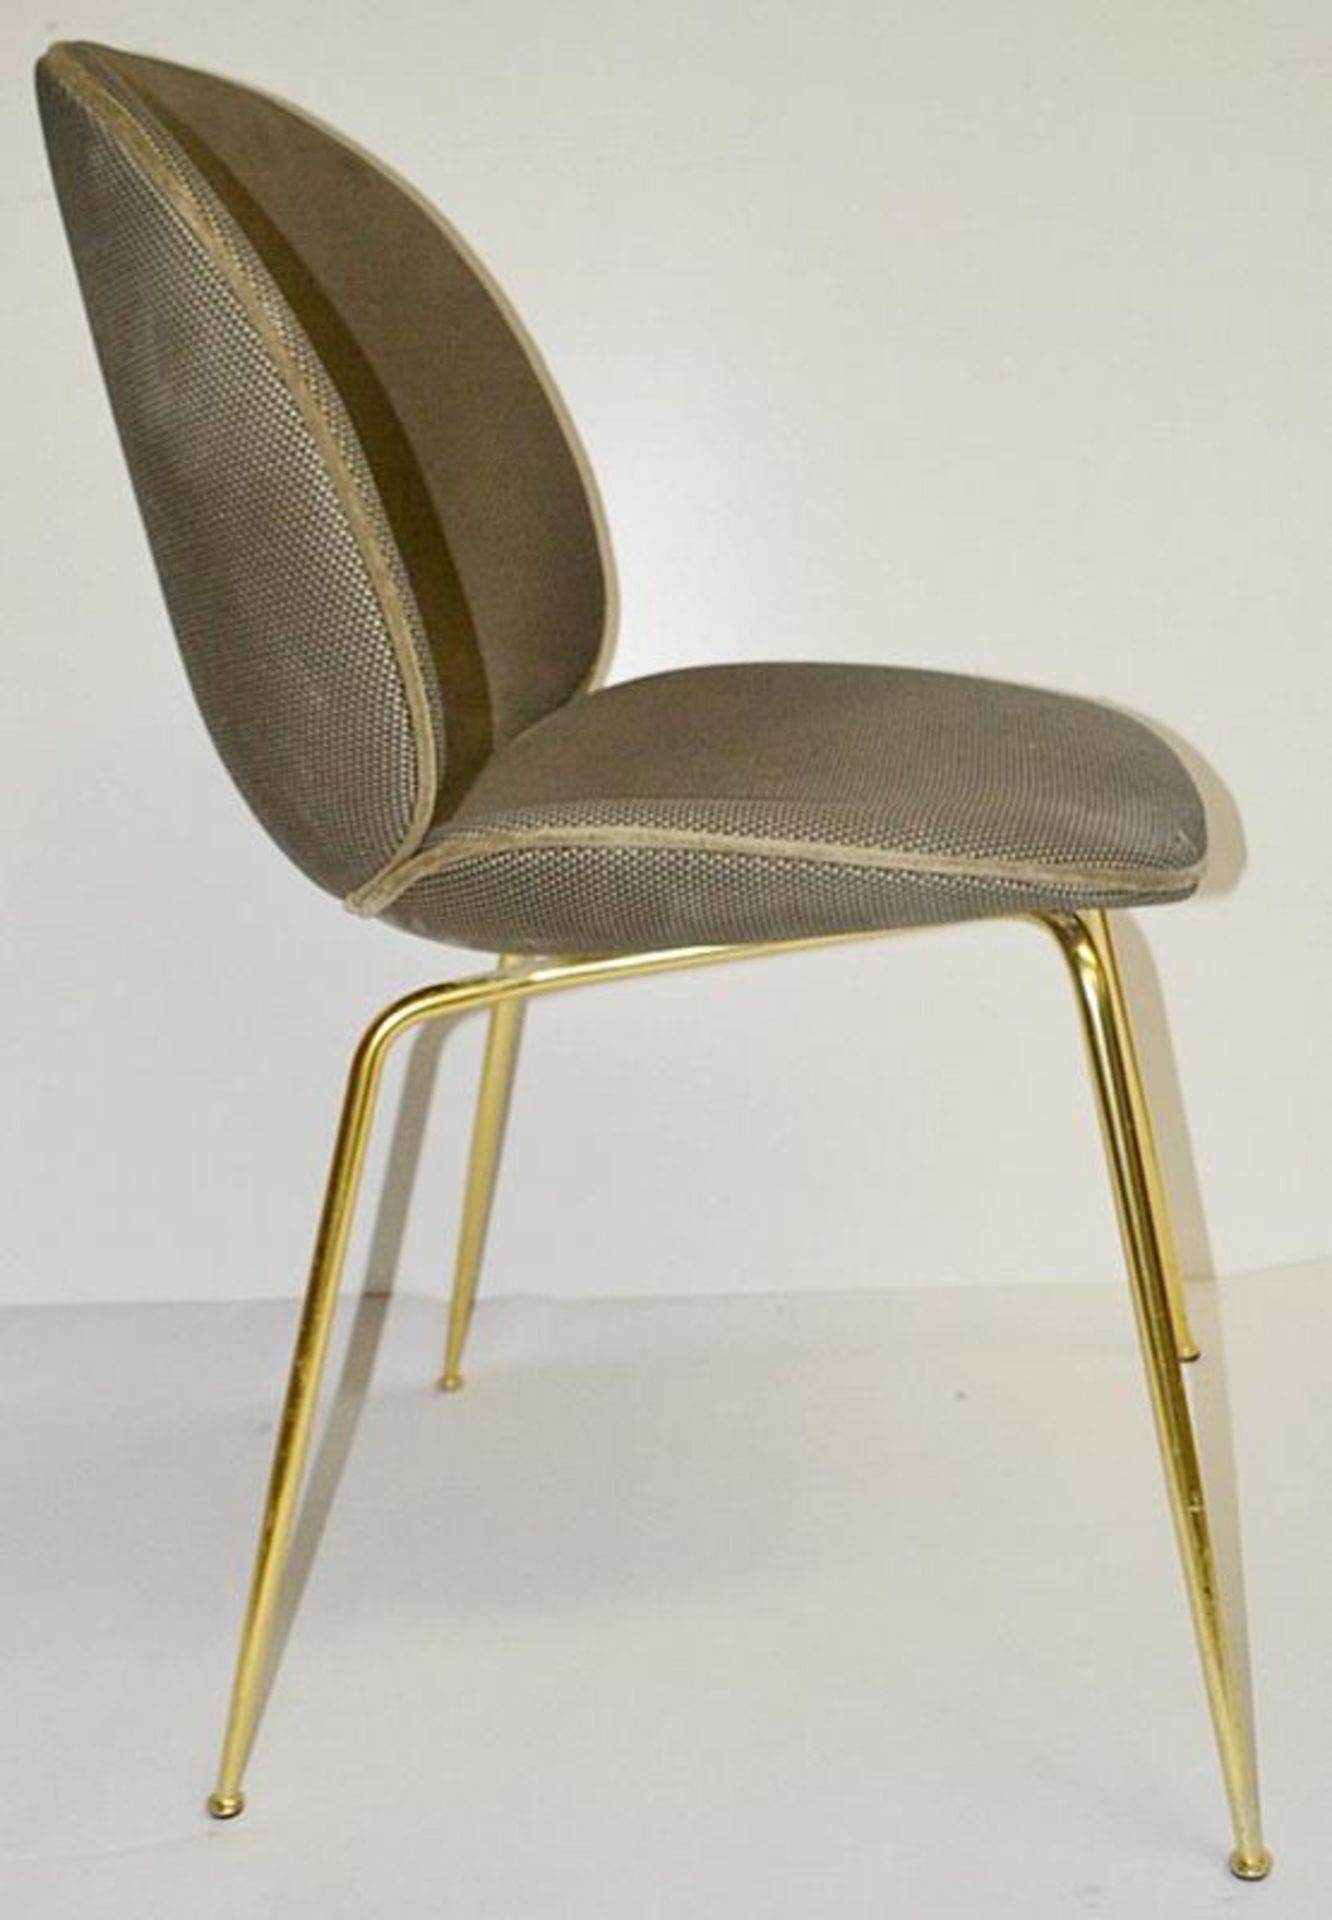 1 x GUBI 'Beetle Chair' - Designed By GamFratesi - Used, Please Read Condition Report - Dimensions: - Image 3 of 6